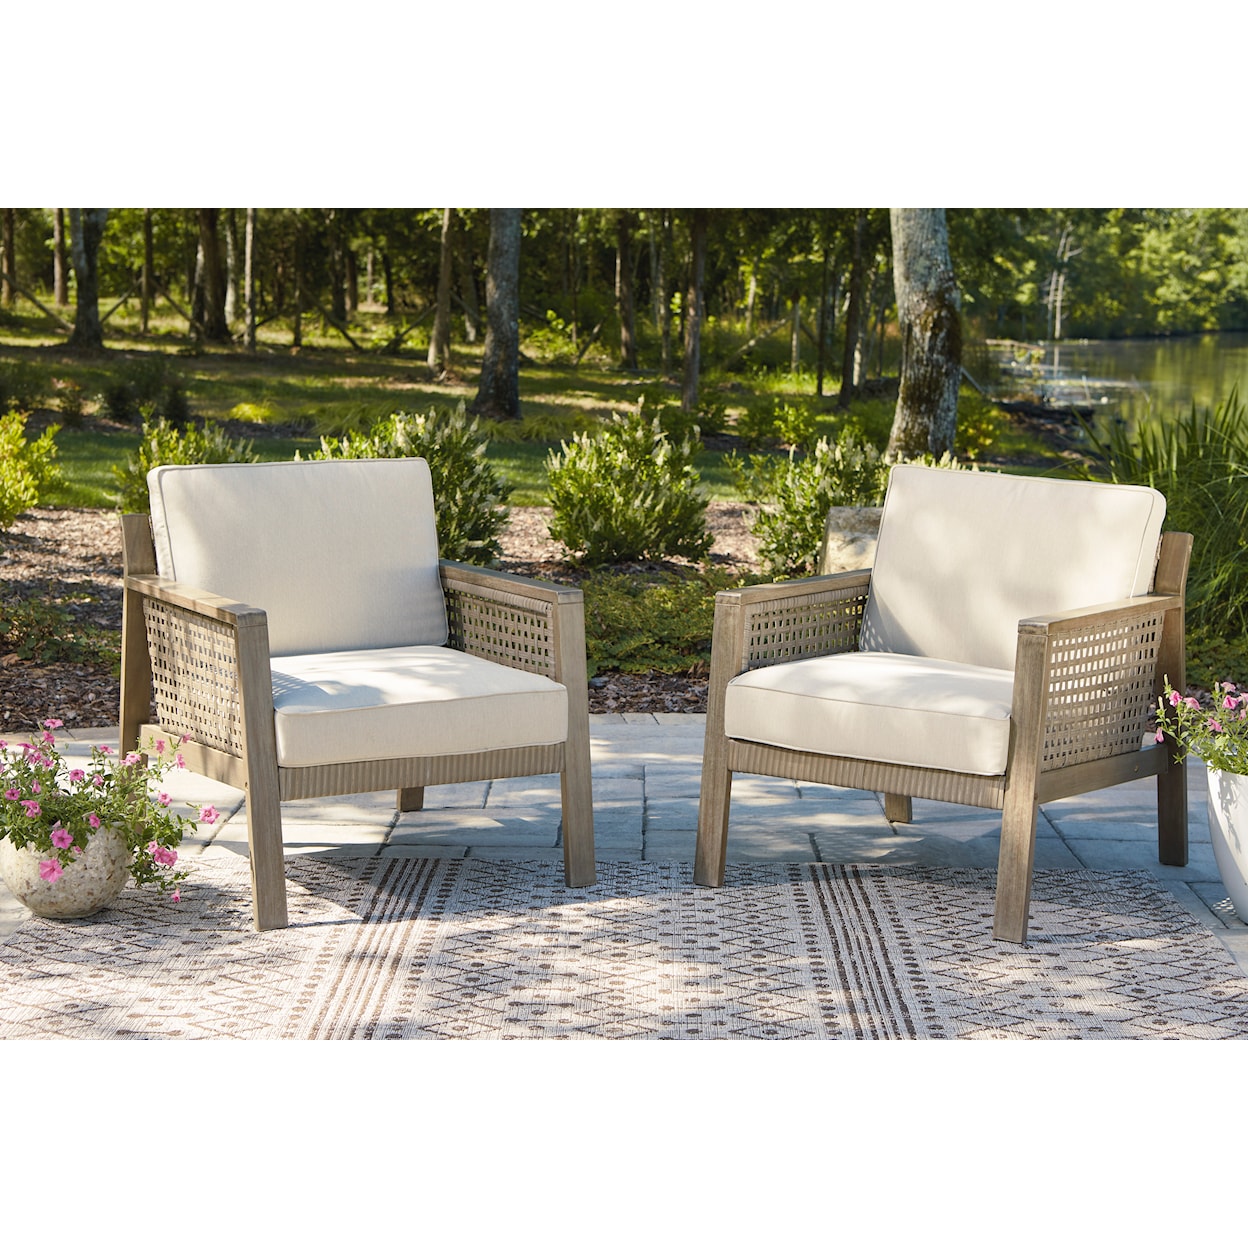 StyleLine Barn Cove Lounge Chair with Cushion (Set of 2)